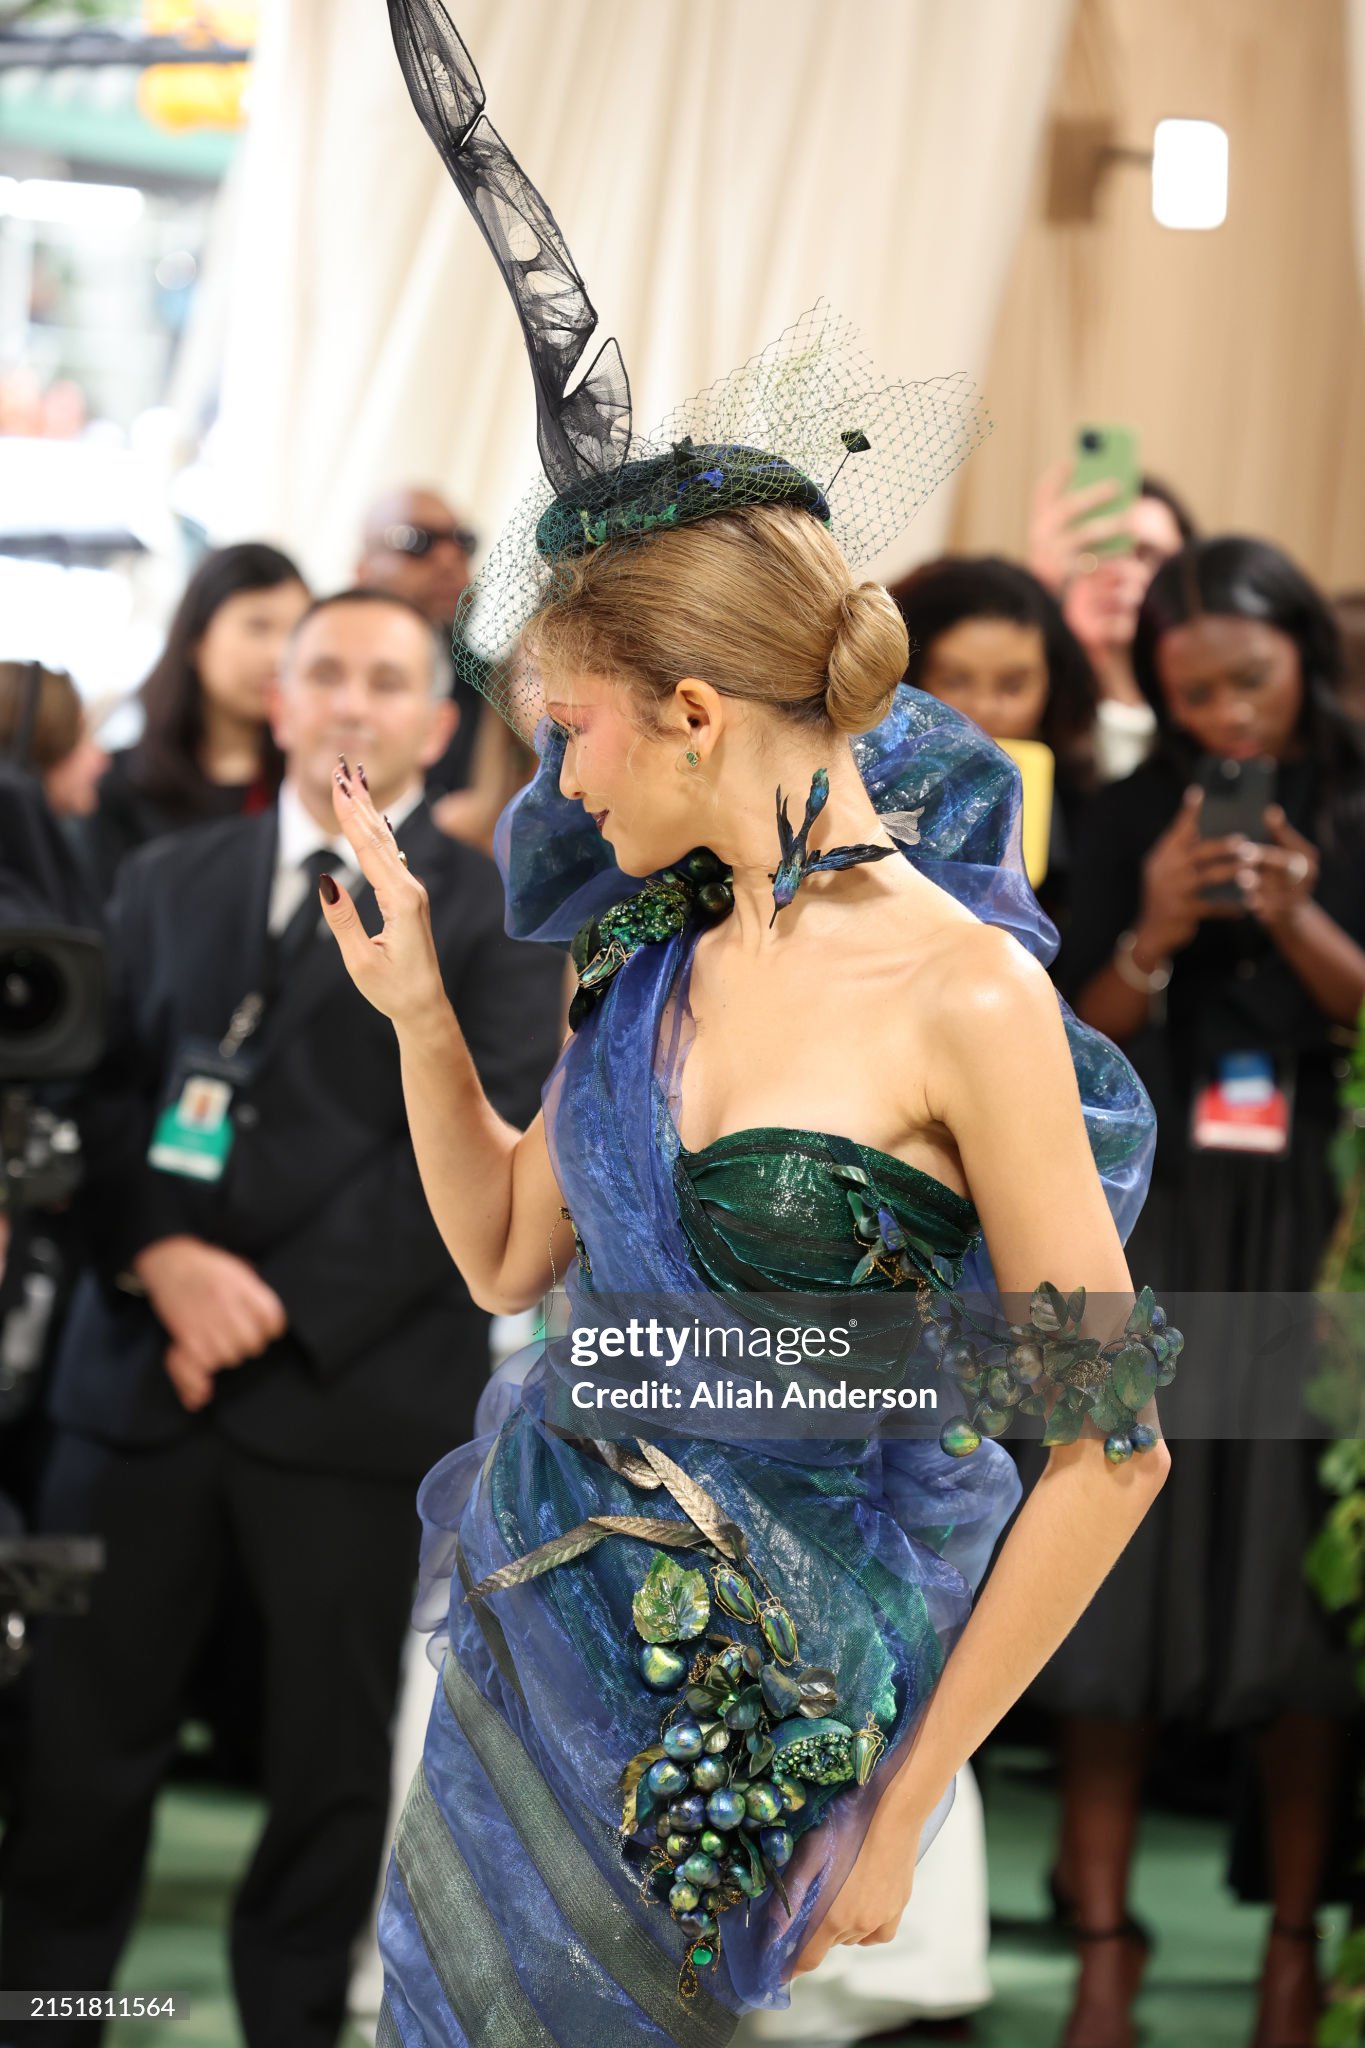 gettyimages-2151811564-2048x2048.jpg